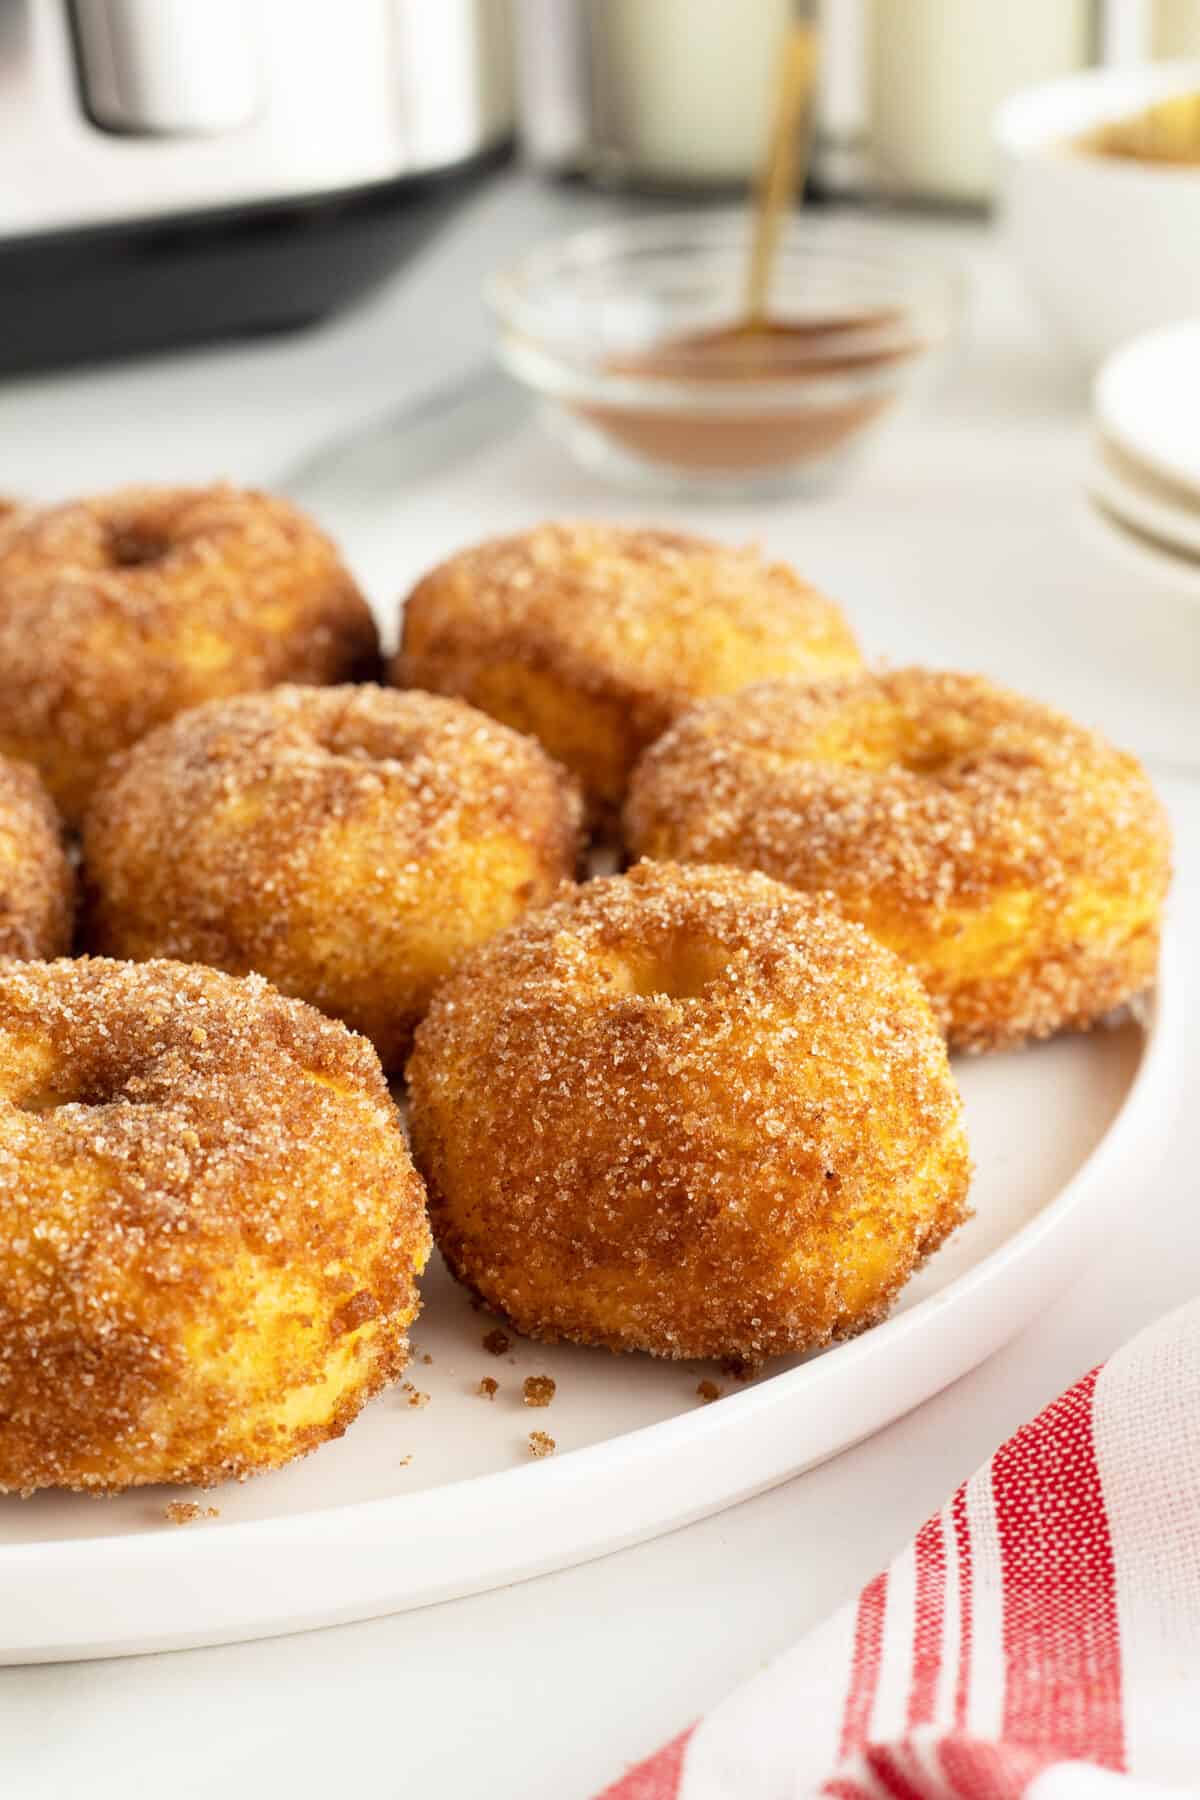 air fryer doughnuts on a plate with sugar and cinnamon